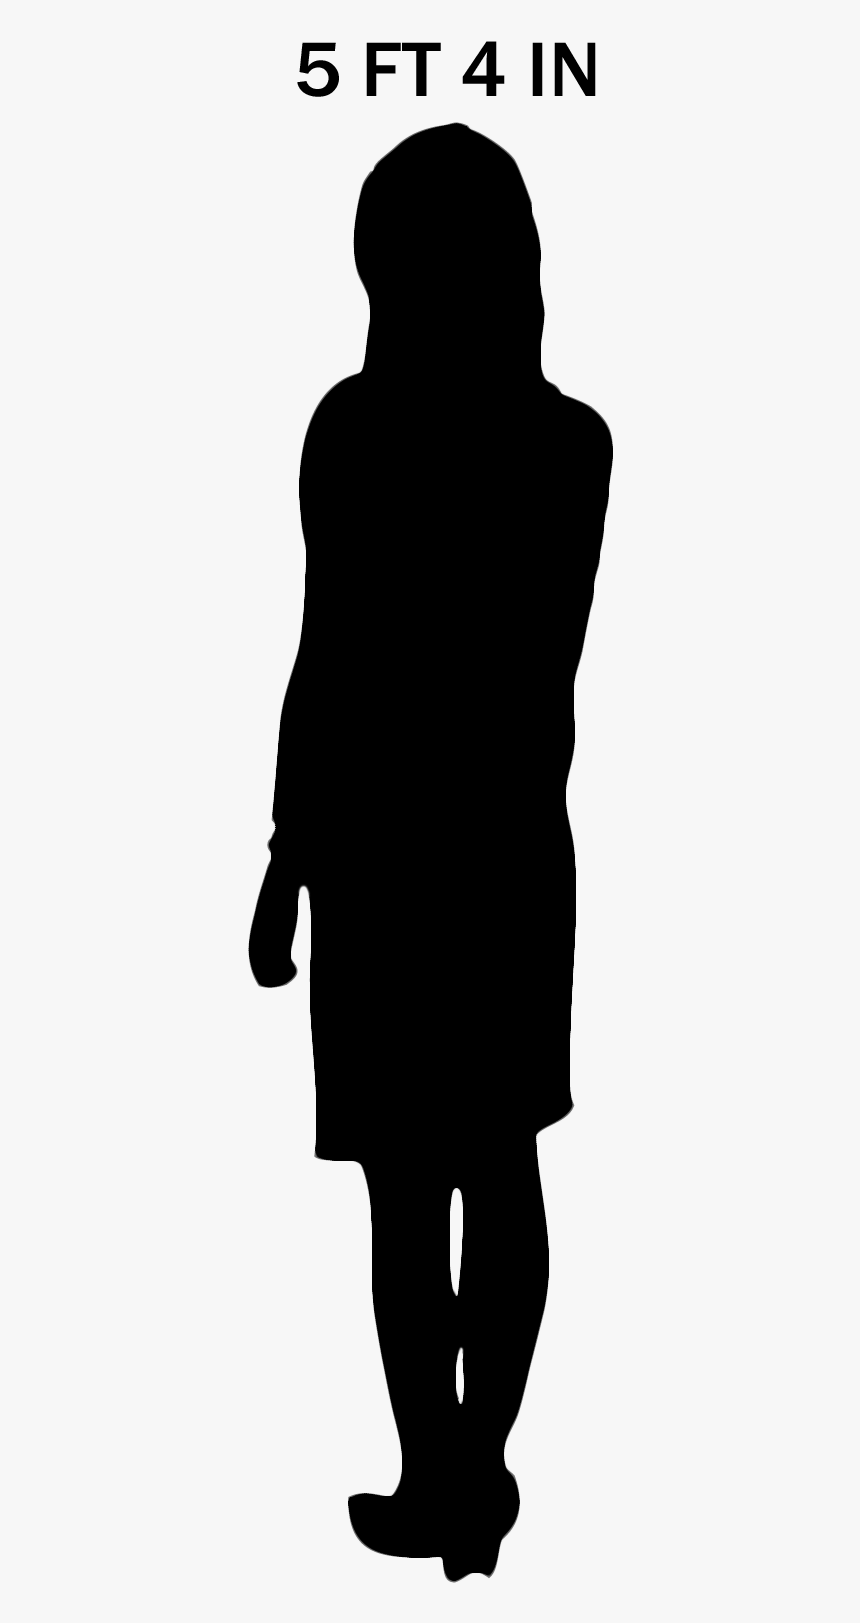 Scale Figures Png - Architectural Scale Figure Png, Transparent Png, Free Download